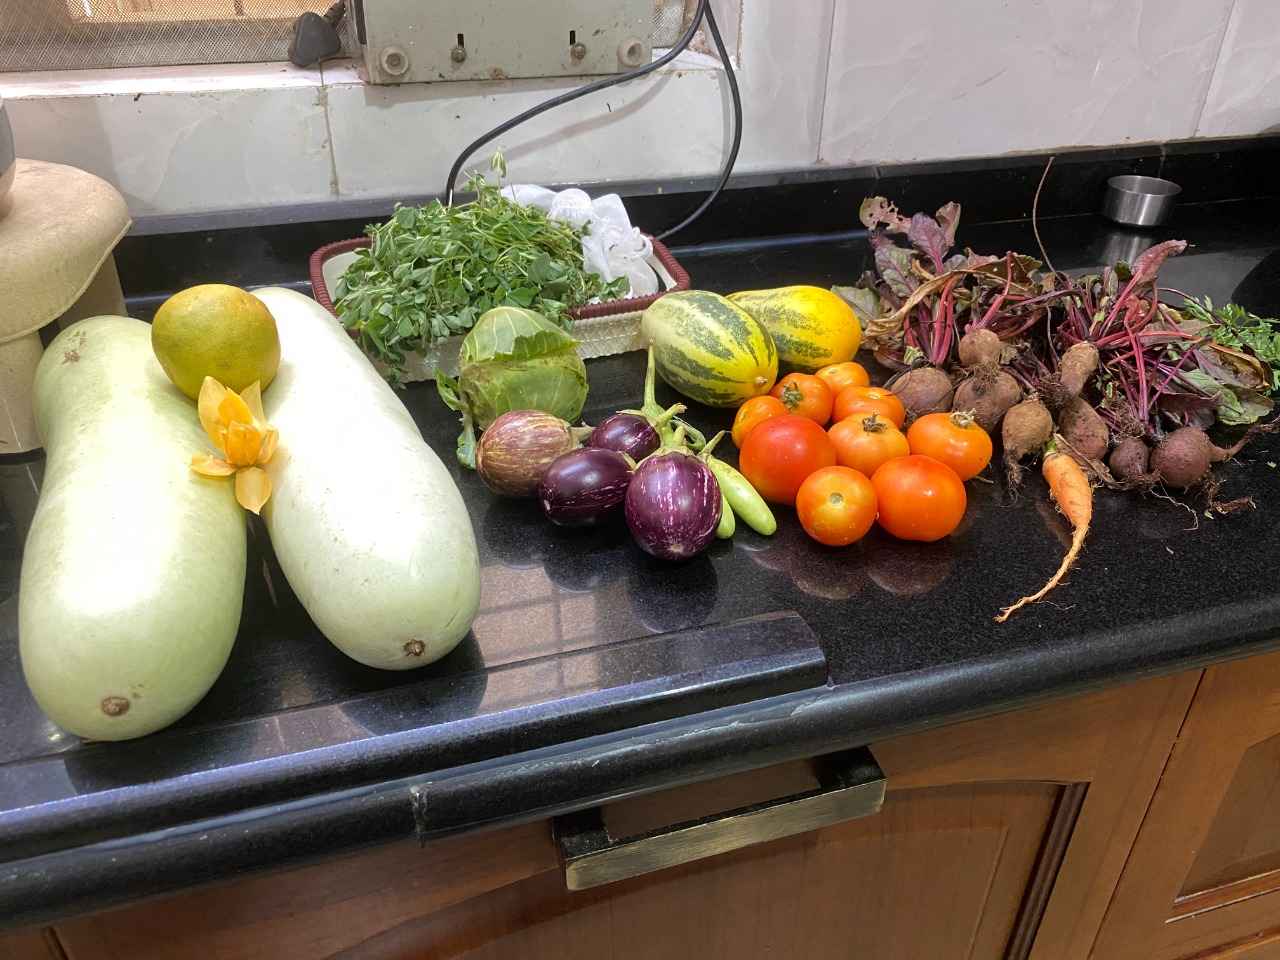 The produce from the vegetable gardens of one of the participants includes pumpkins, tomatoes, brinjals.